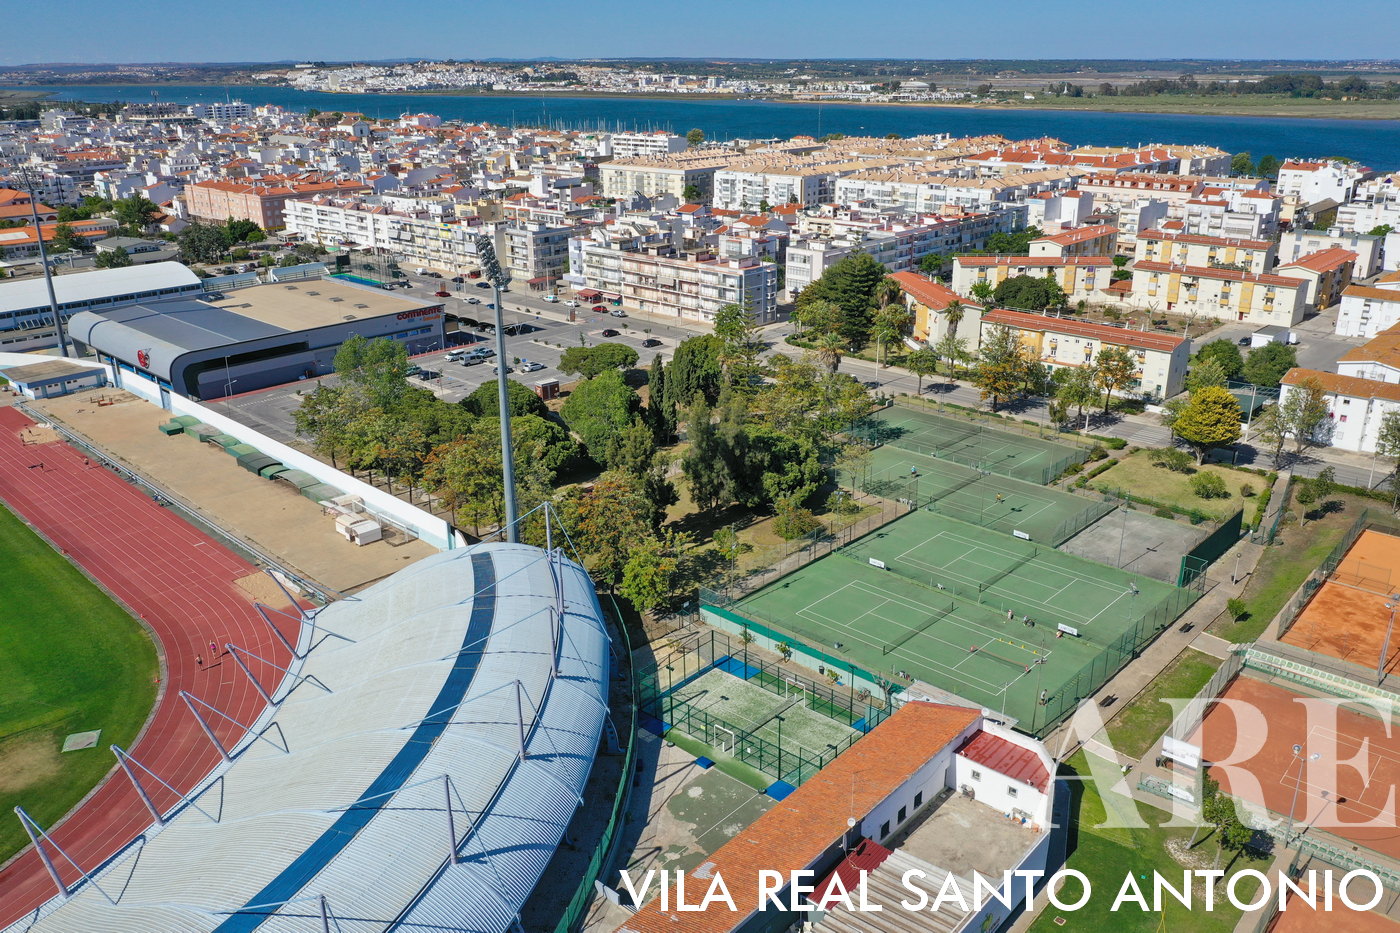 Panoramic View of Vila Real de Santo António from the Sports Area